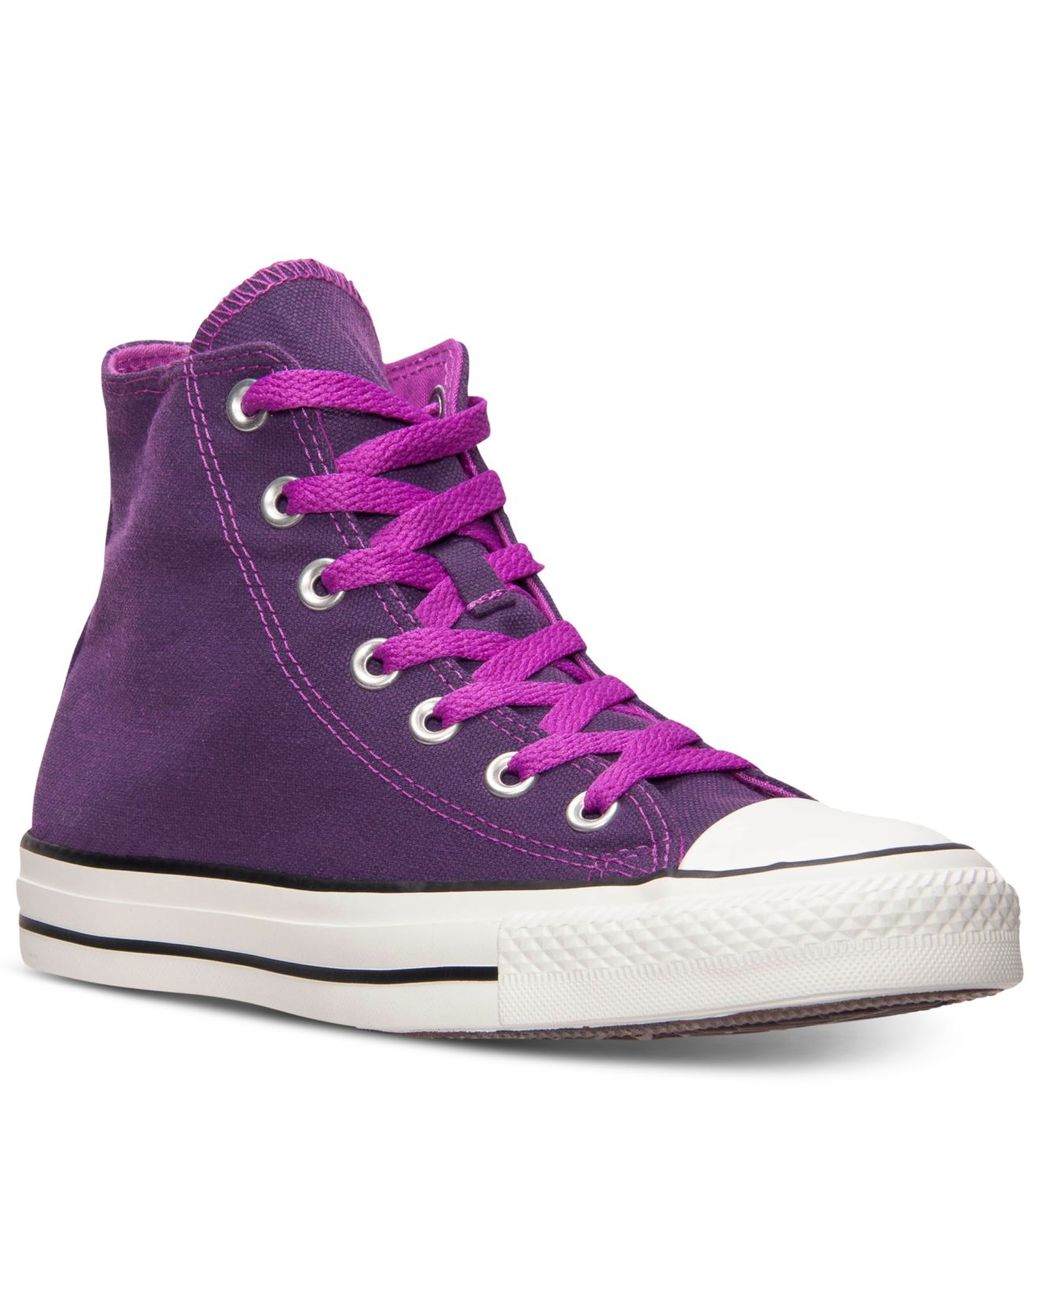 Converse Women'S Chuck Taylor All Star Hi Dark Neon Casual Sneakers From  Finish Line in Purple | Lyst